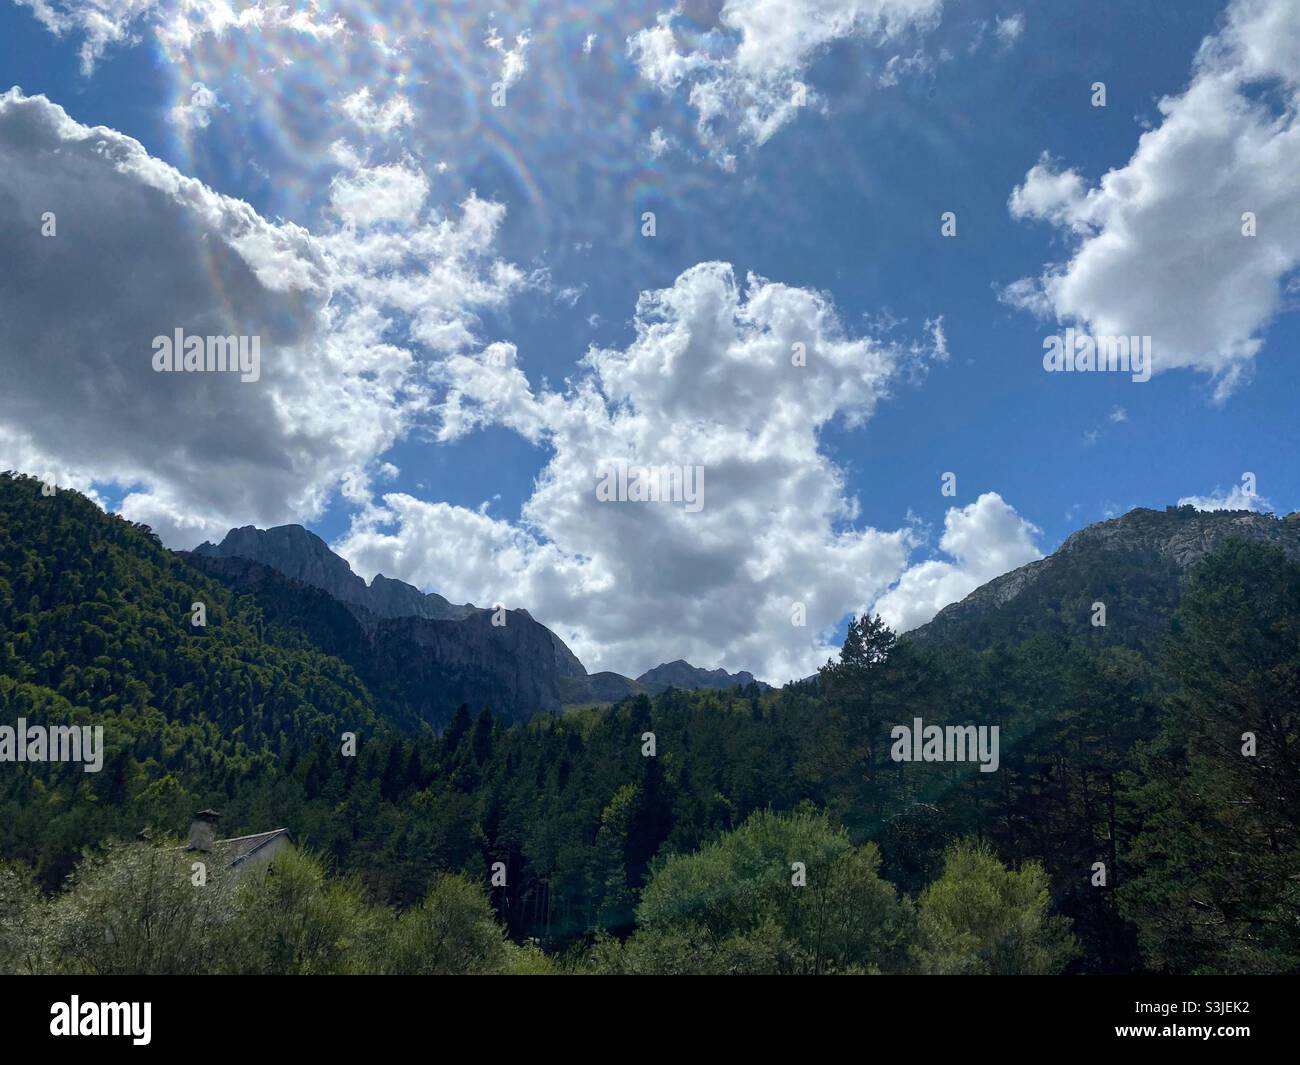 Dramatic clouds in the mountains Stock Photo